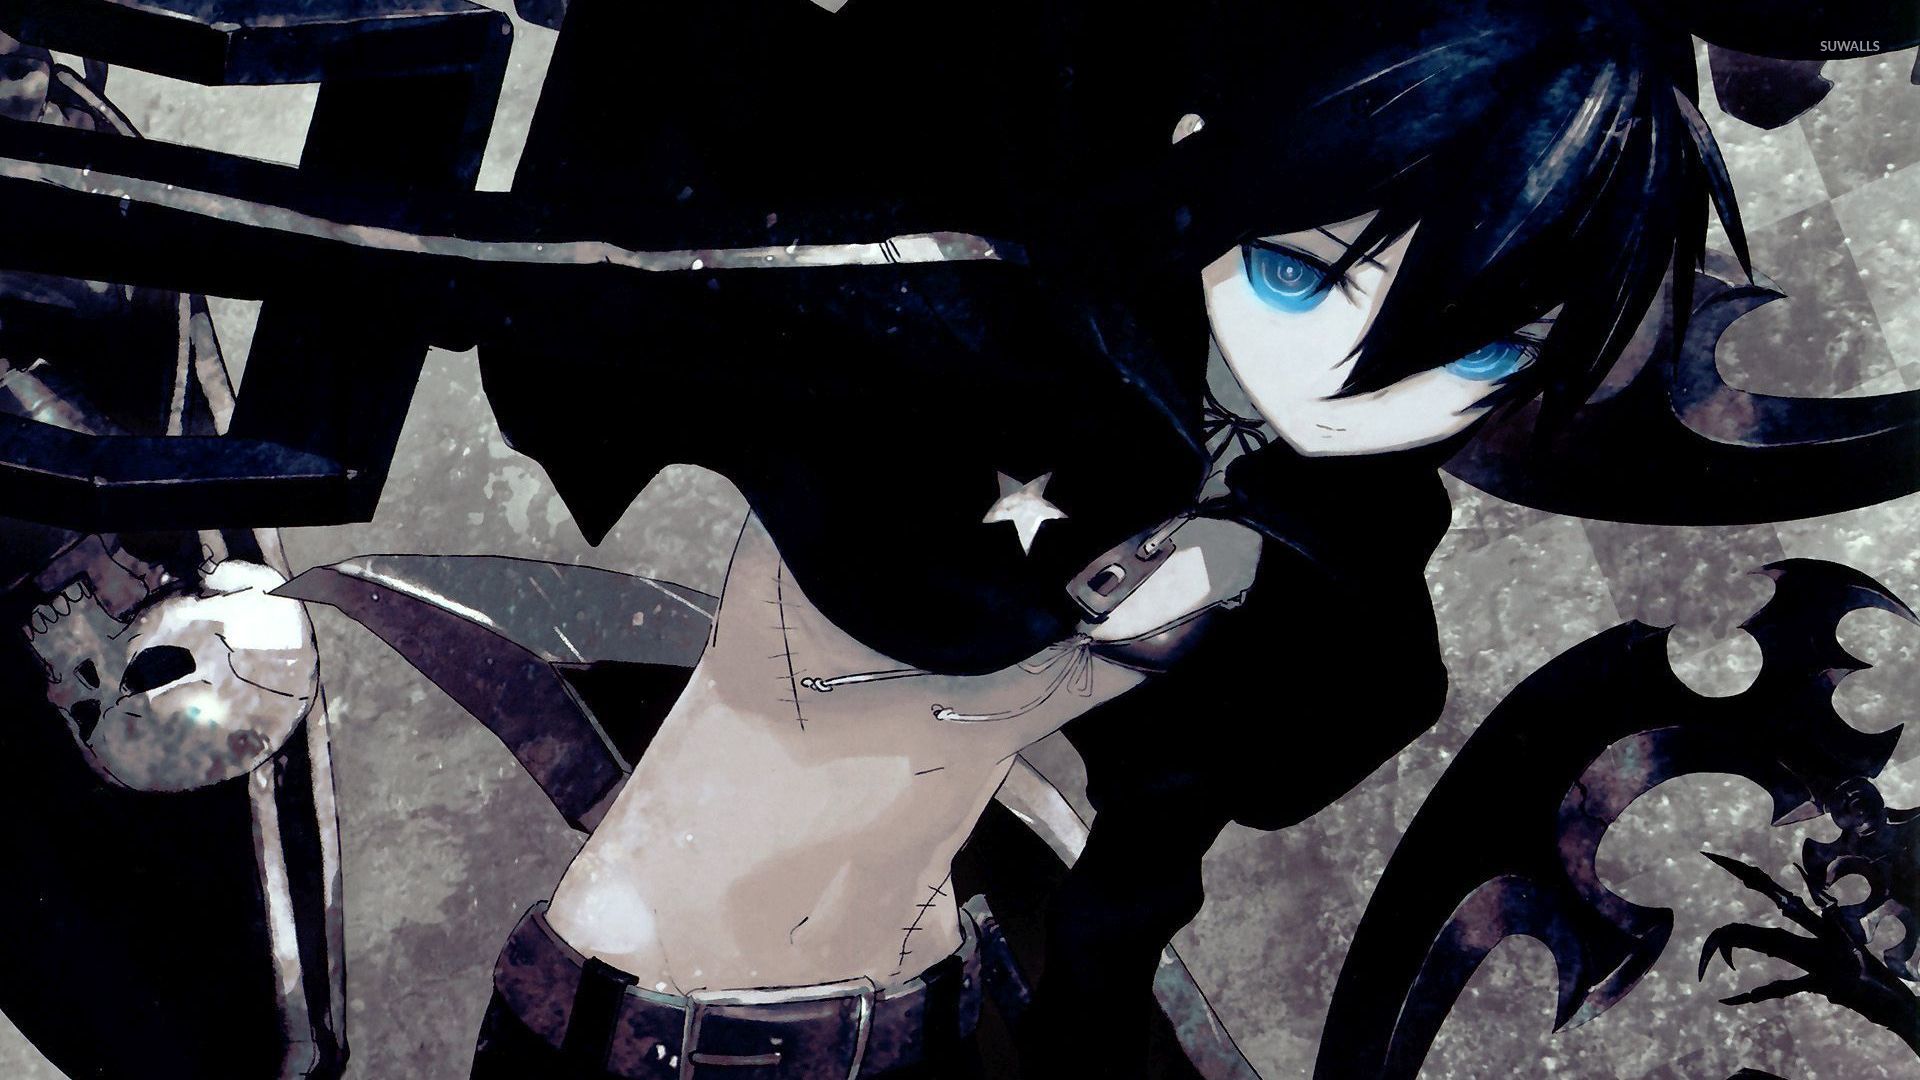 Black Rock Shooter with glowing blue eyes wallpaper - Anime wallpapers ...